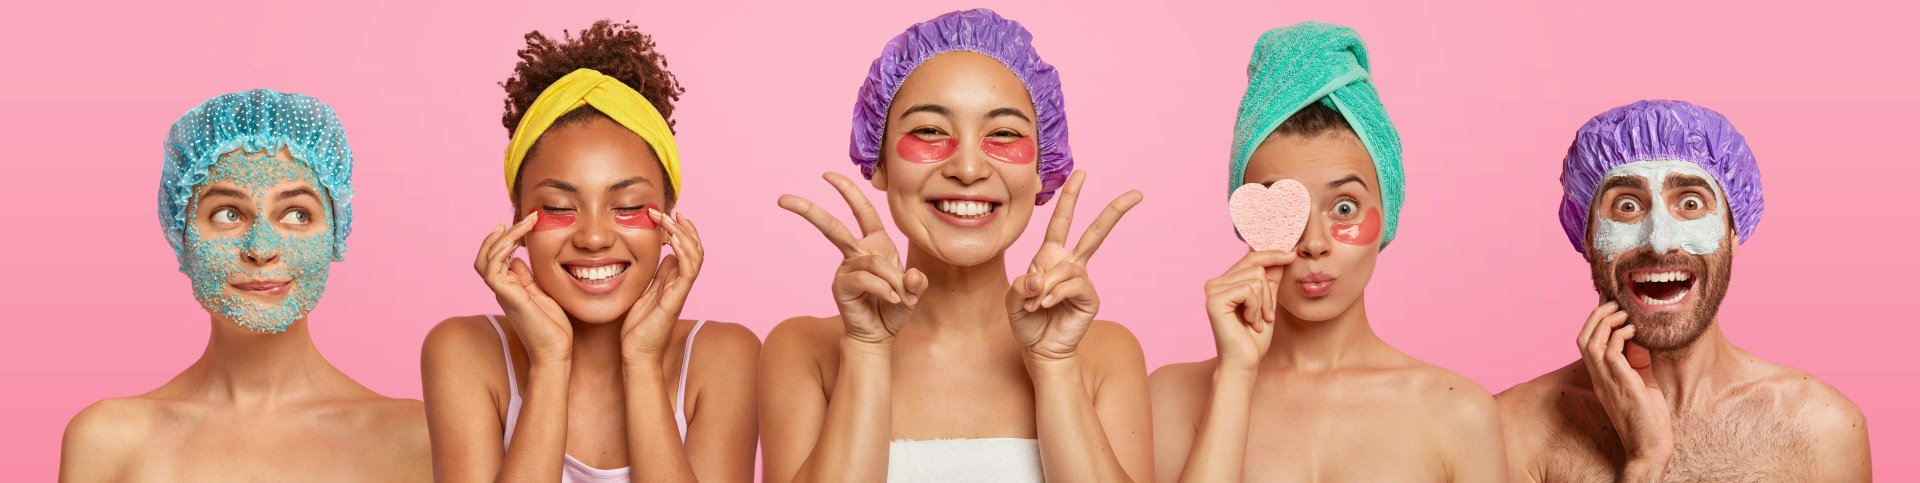 Men and women outrageously happy about using skincare products.